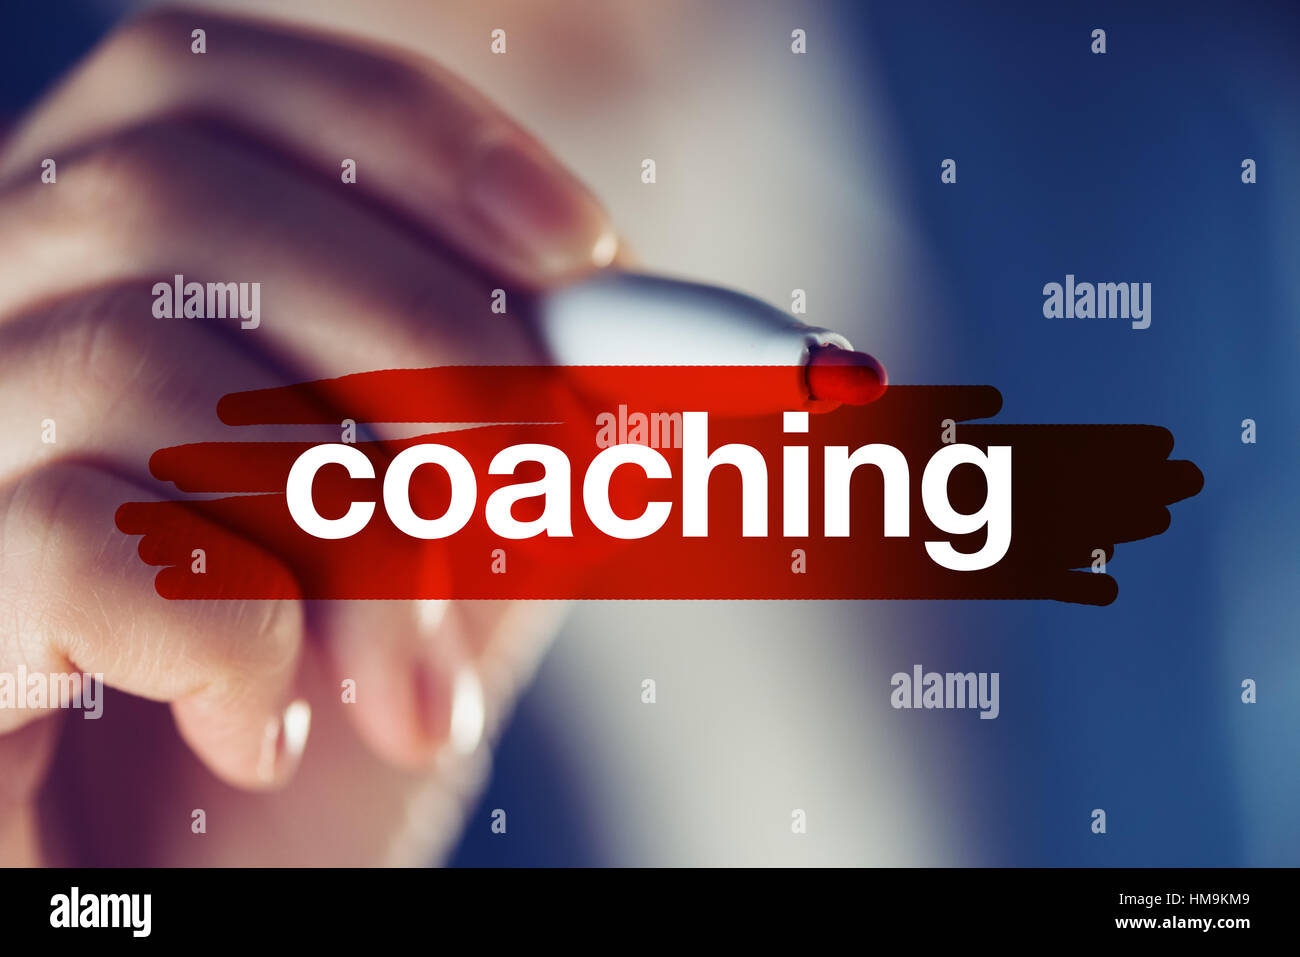 Business coaching concept, businesswoman highlighting term with red marker pen Stock Photo